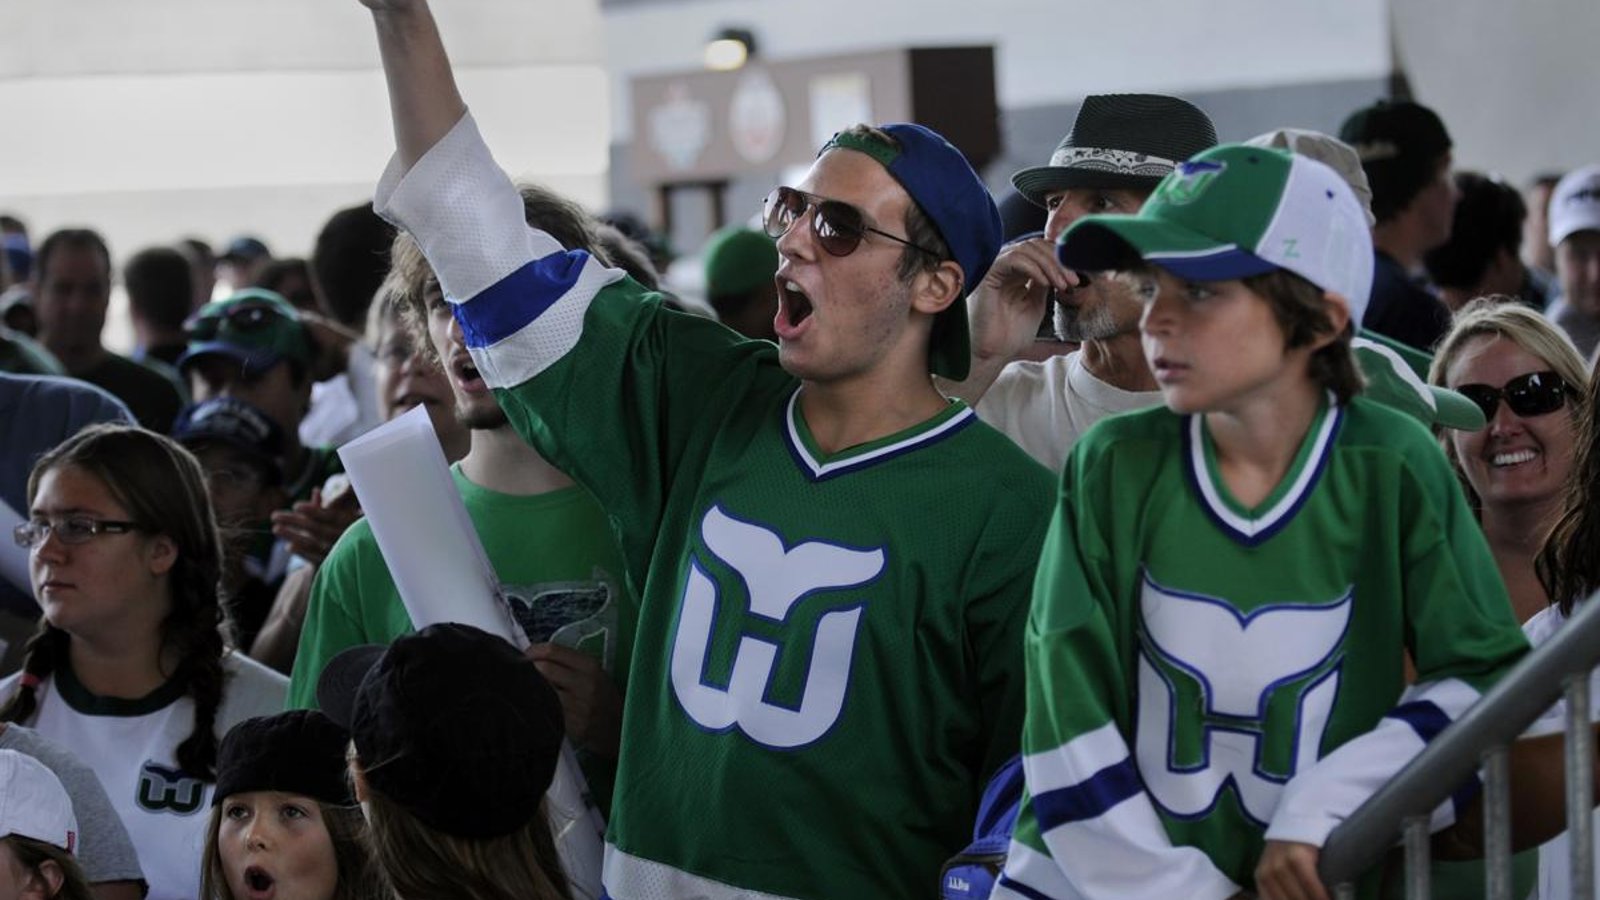 Hurricanes bring back popular goal song “Brass Bonanza” for Whalers night